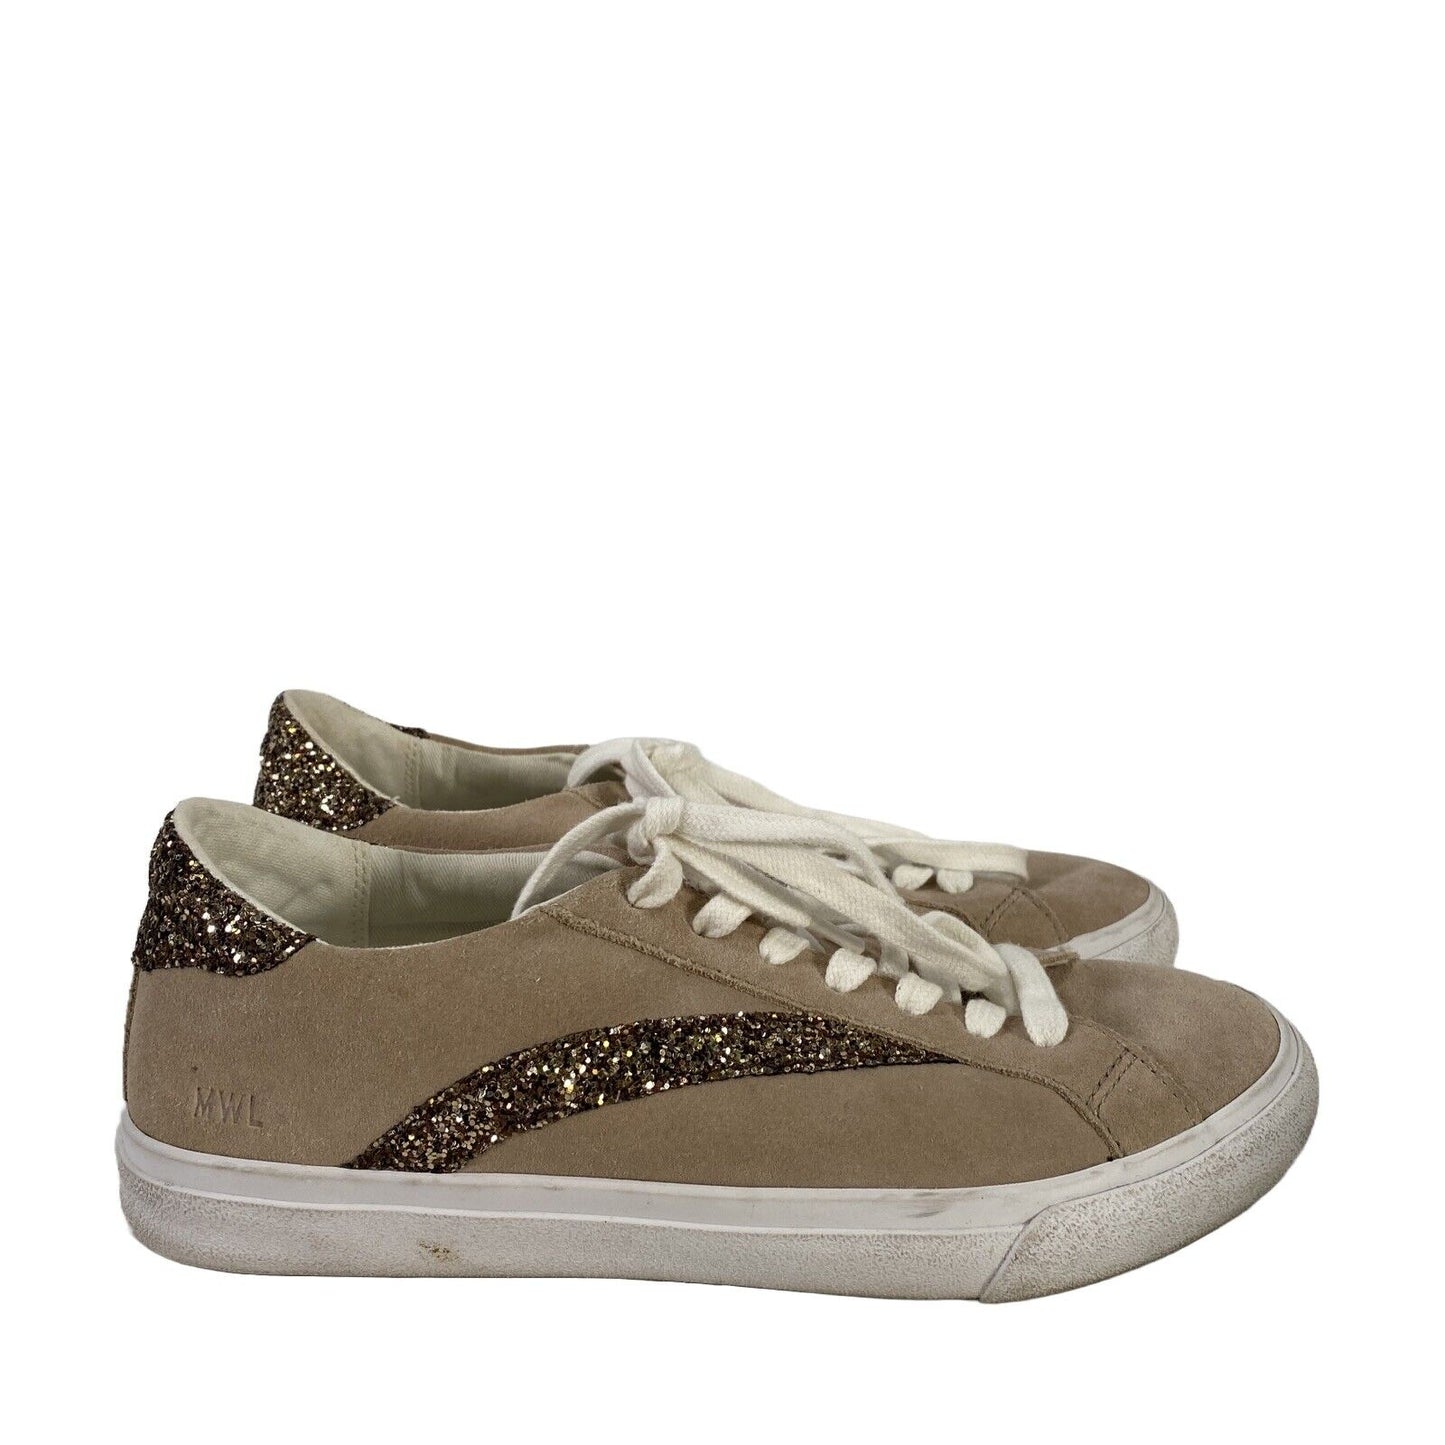 Madewell Women's Beige/Gold Sequin Low Top Lace Up Sneakers - 8M